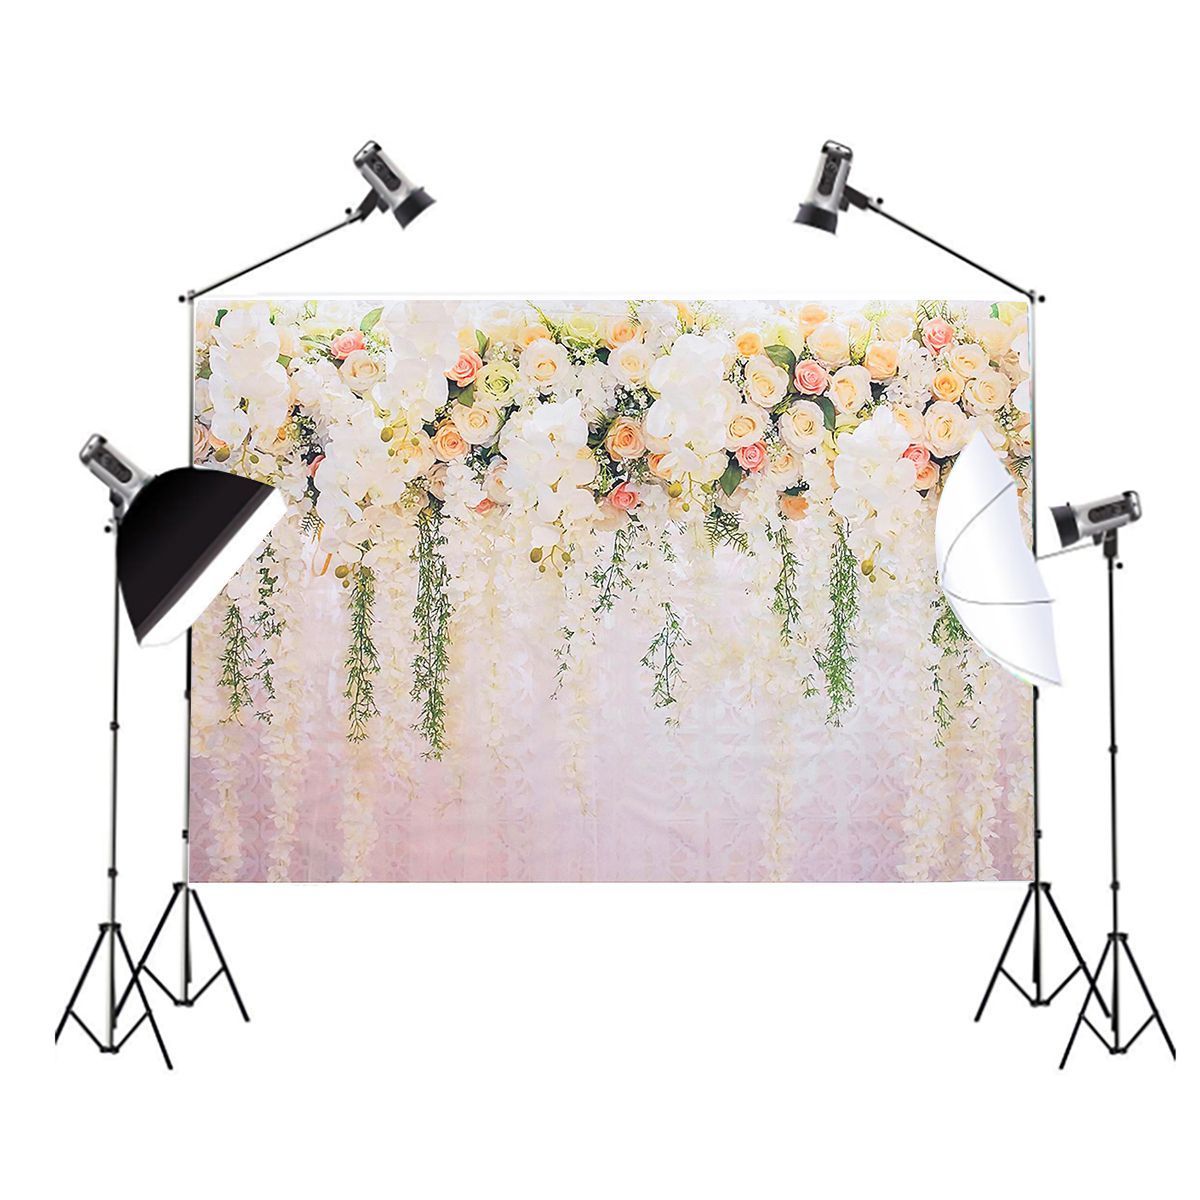 7x5FT-Rose-Wedding-Flowers-Wall-Backdrop-Photography-Prop-Photo-Background-1681634